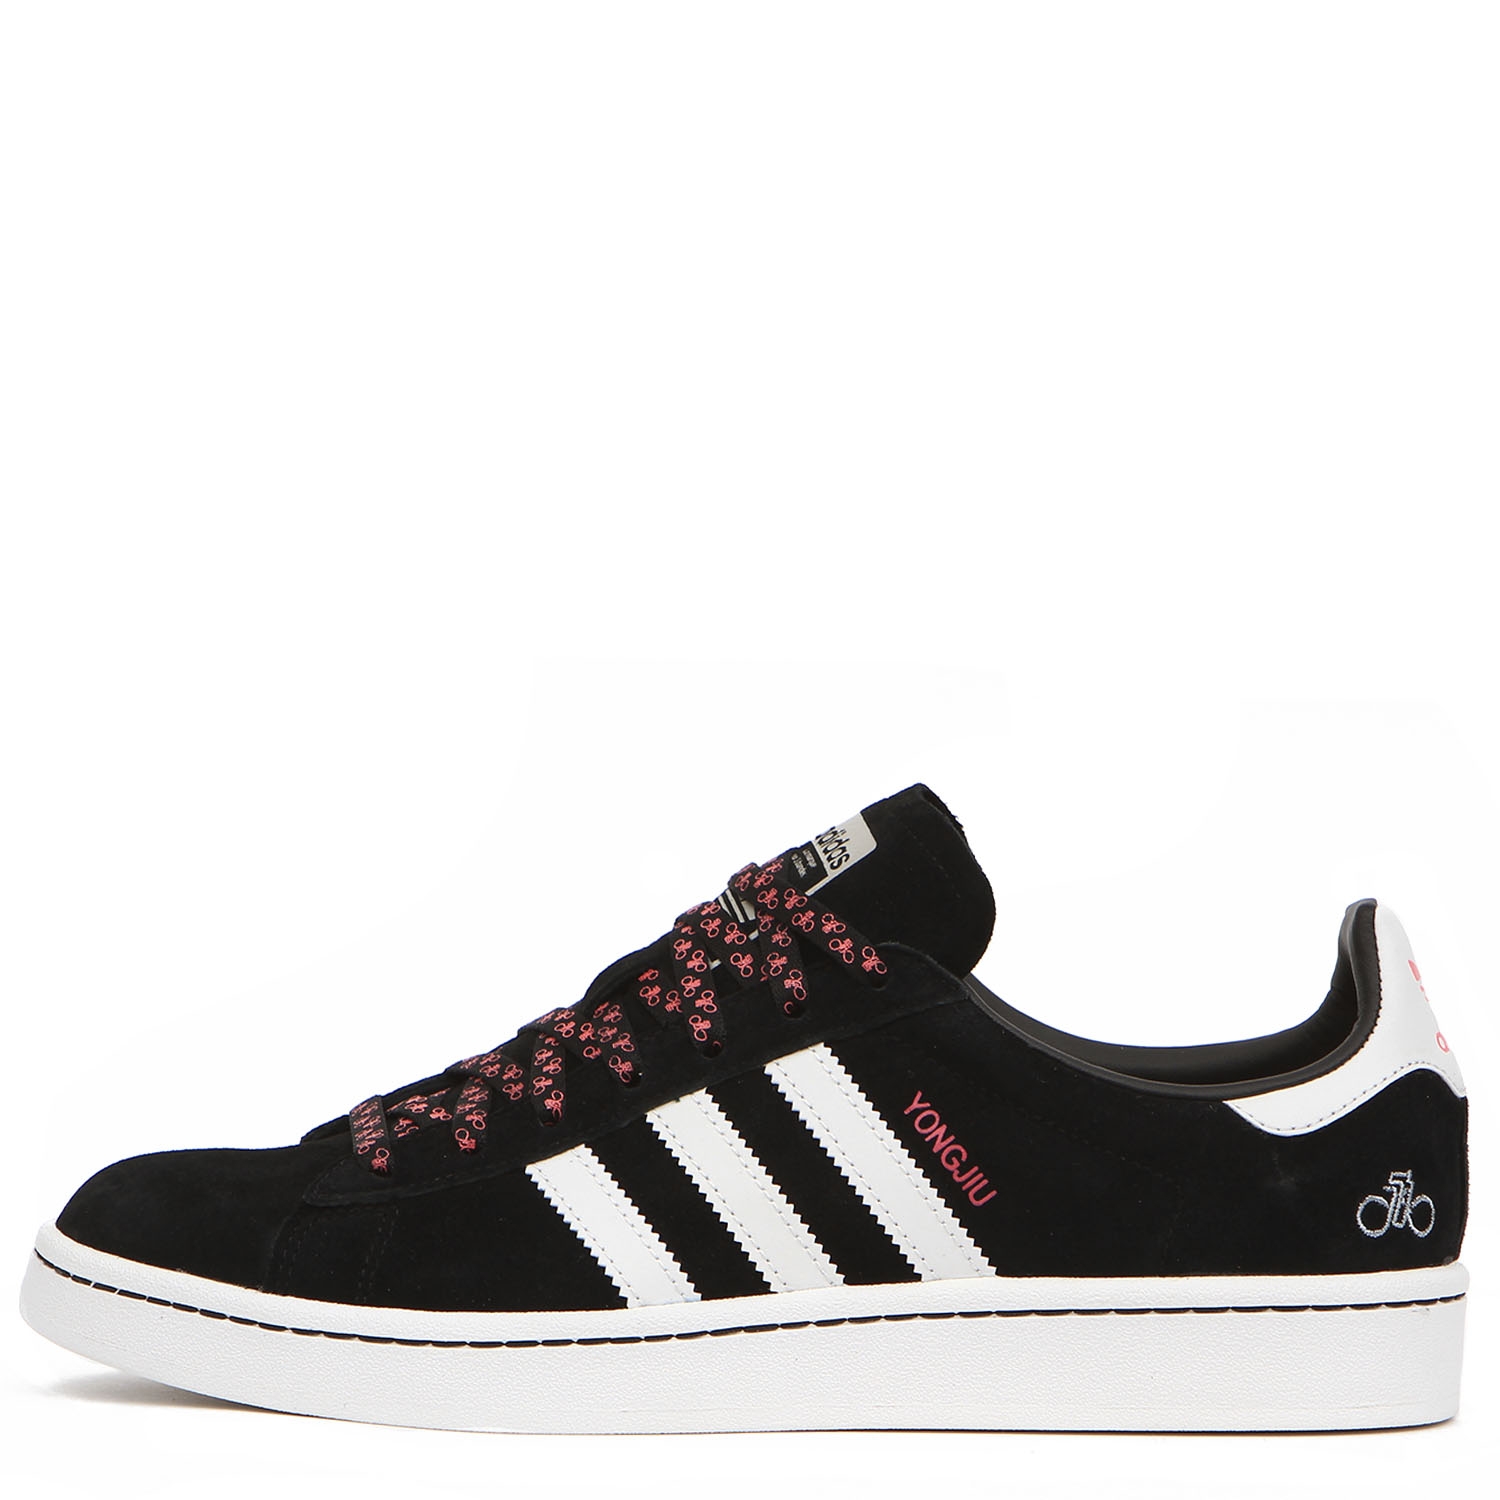 adidas Originals CAMPUS x Forever Bicycle Campus Core Black/Grey One/Crystal White